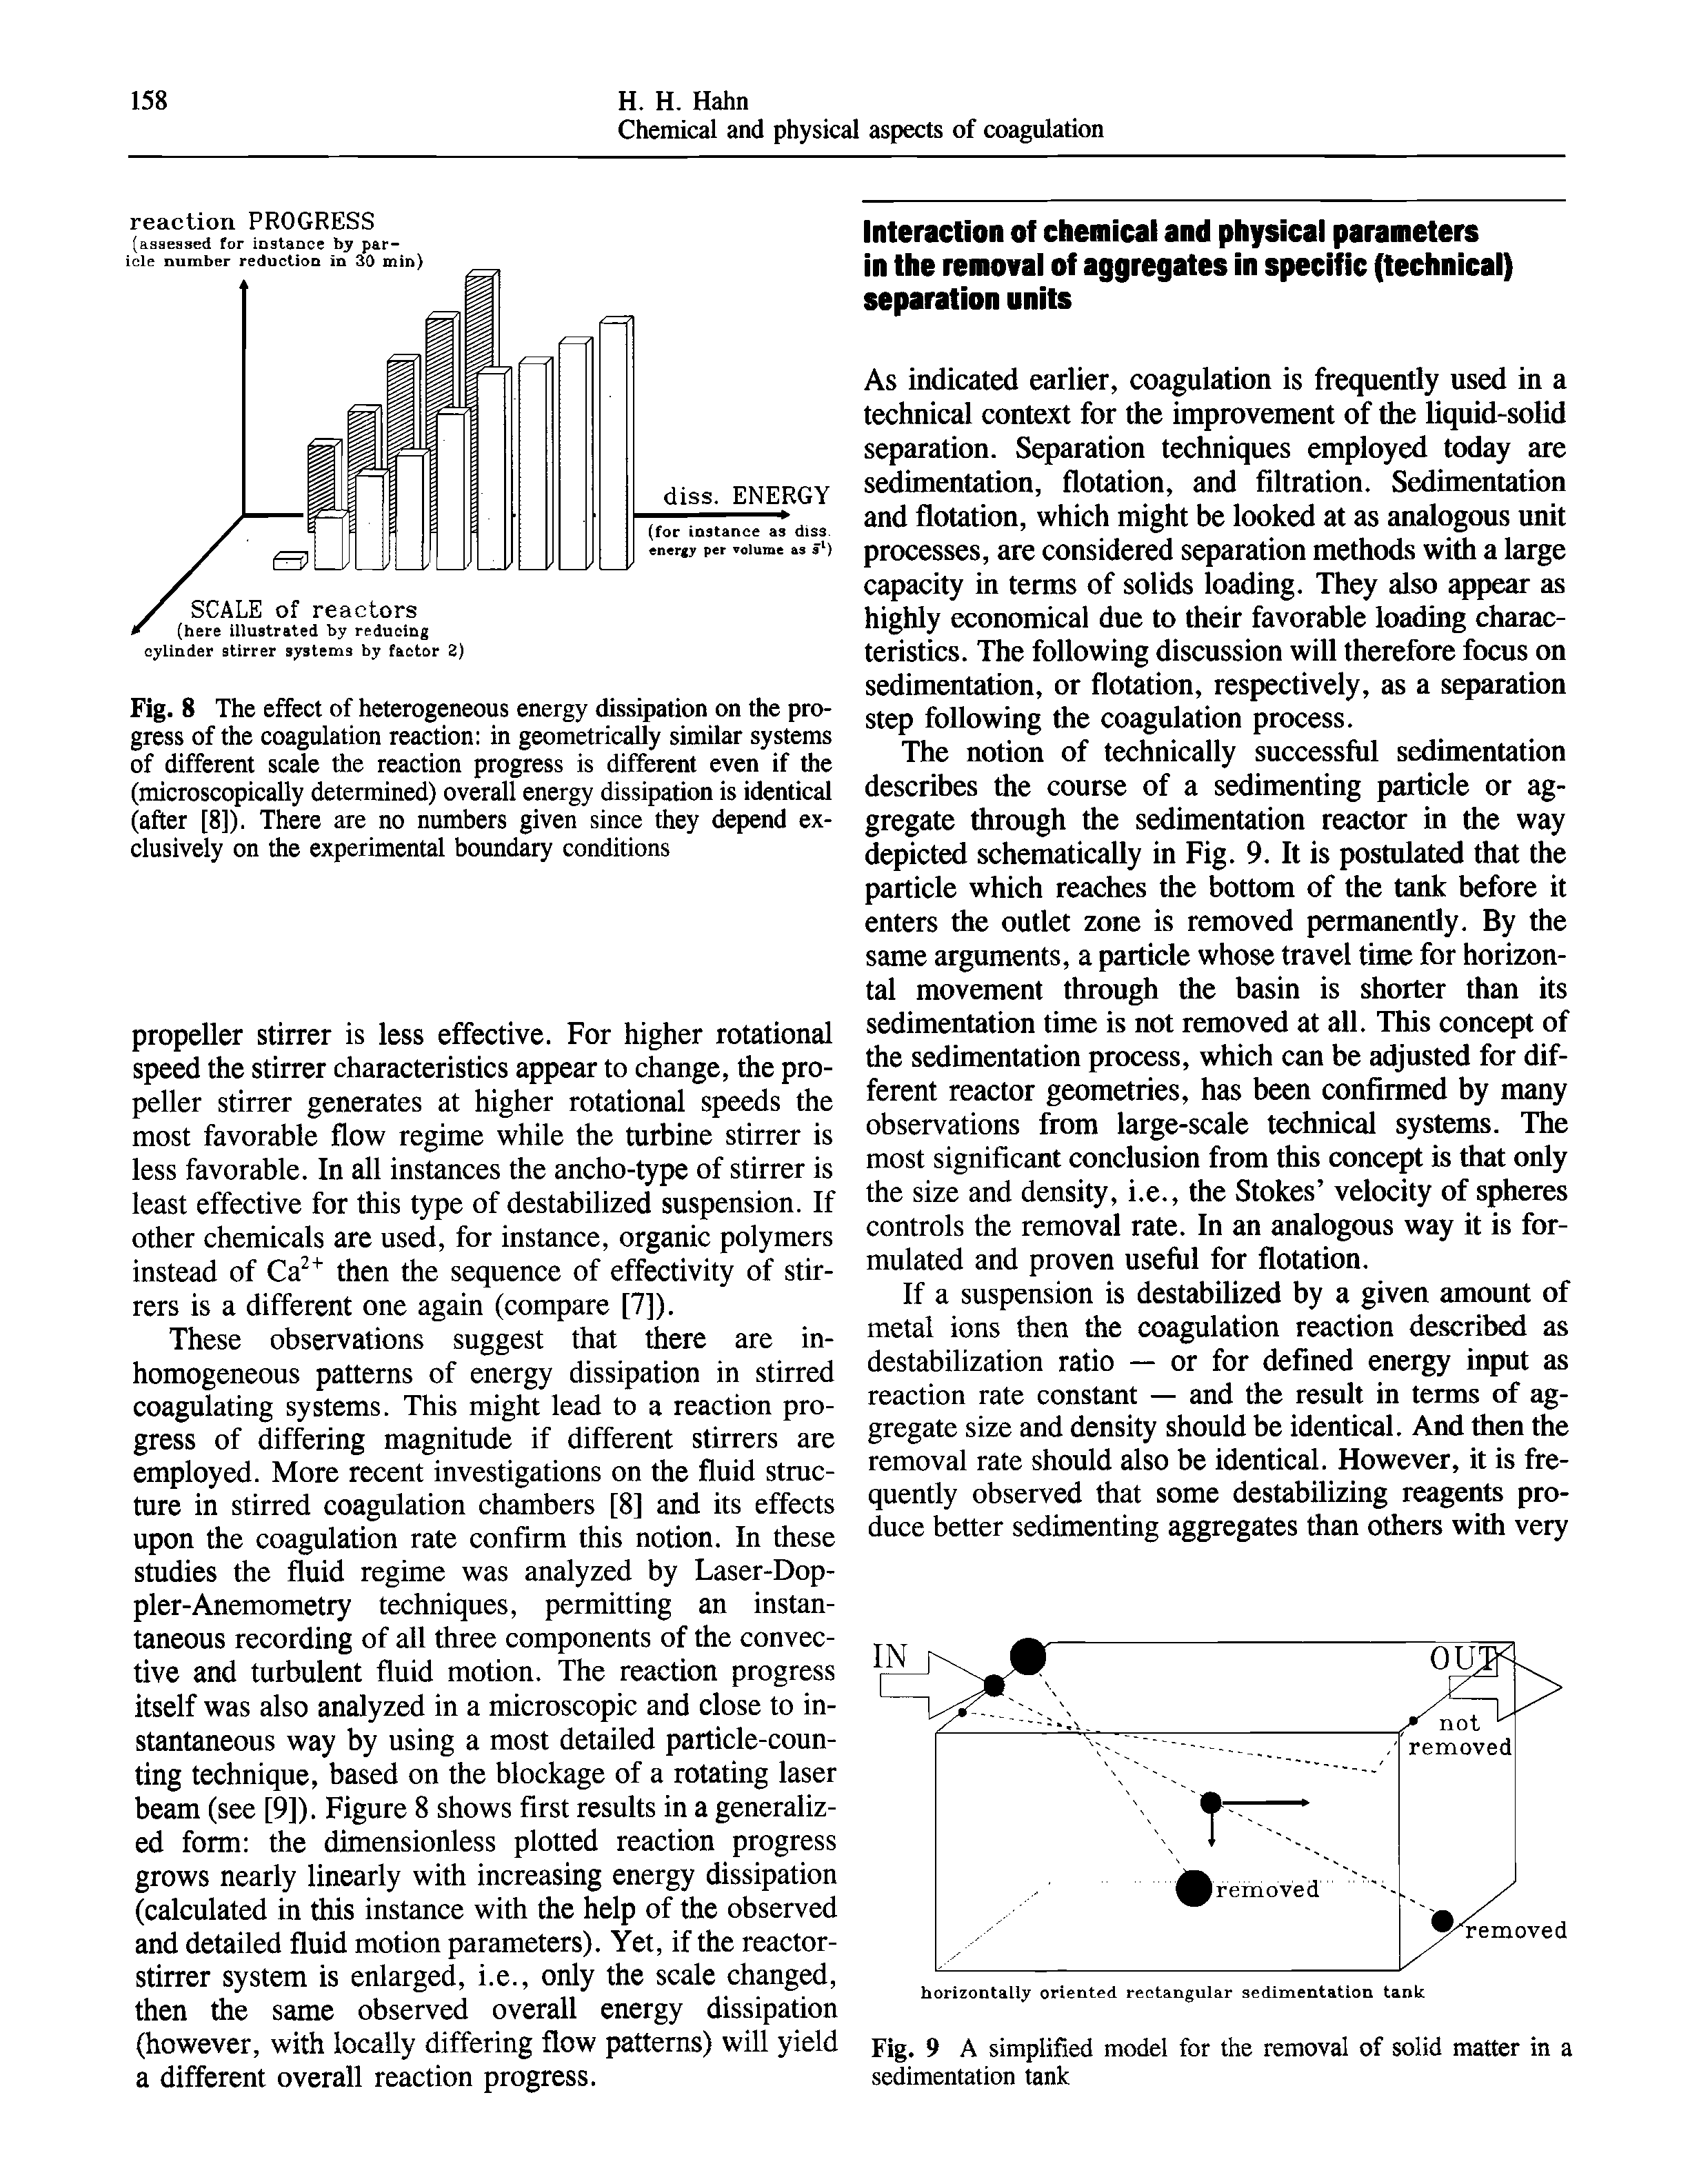 Fig. 8 The effect of heterogeneous energy dissipation on the progress of the coagulation reaction in geometrically similar systems of different scale the reaction progress is different even if the (microscopically determined) overall energy dissipation is identical (after [8]). There are no numbers given since they depend exclusively on the experimental boundary conditions...